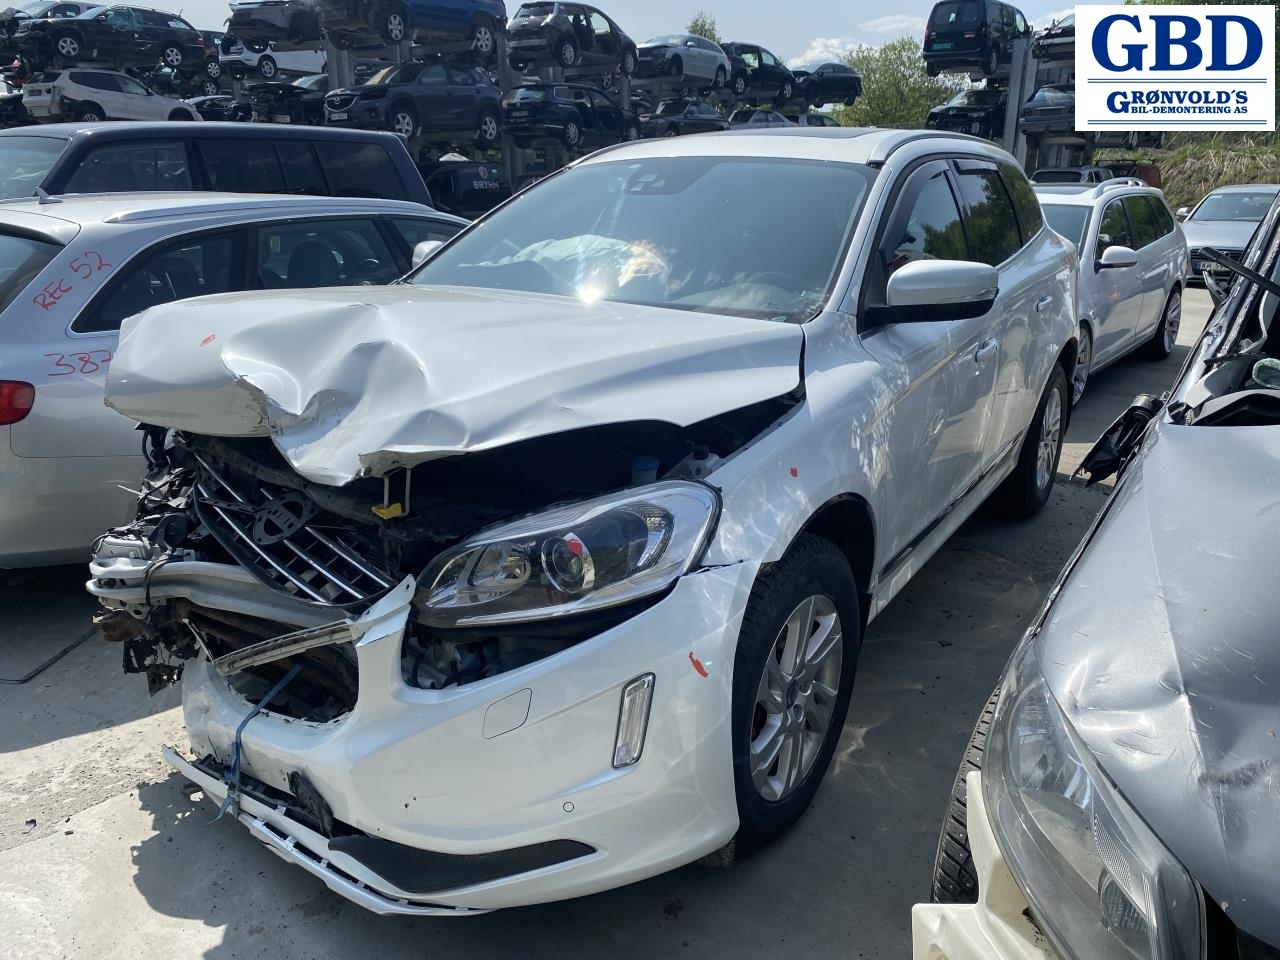 Volvo XC60, 2014-2017 (Type I, Fase 2) parts car, Engine code: D5244T17, Gearbox code: 1285176